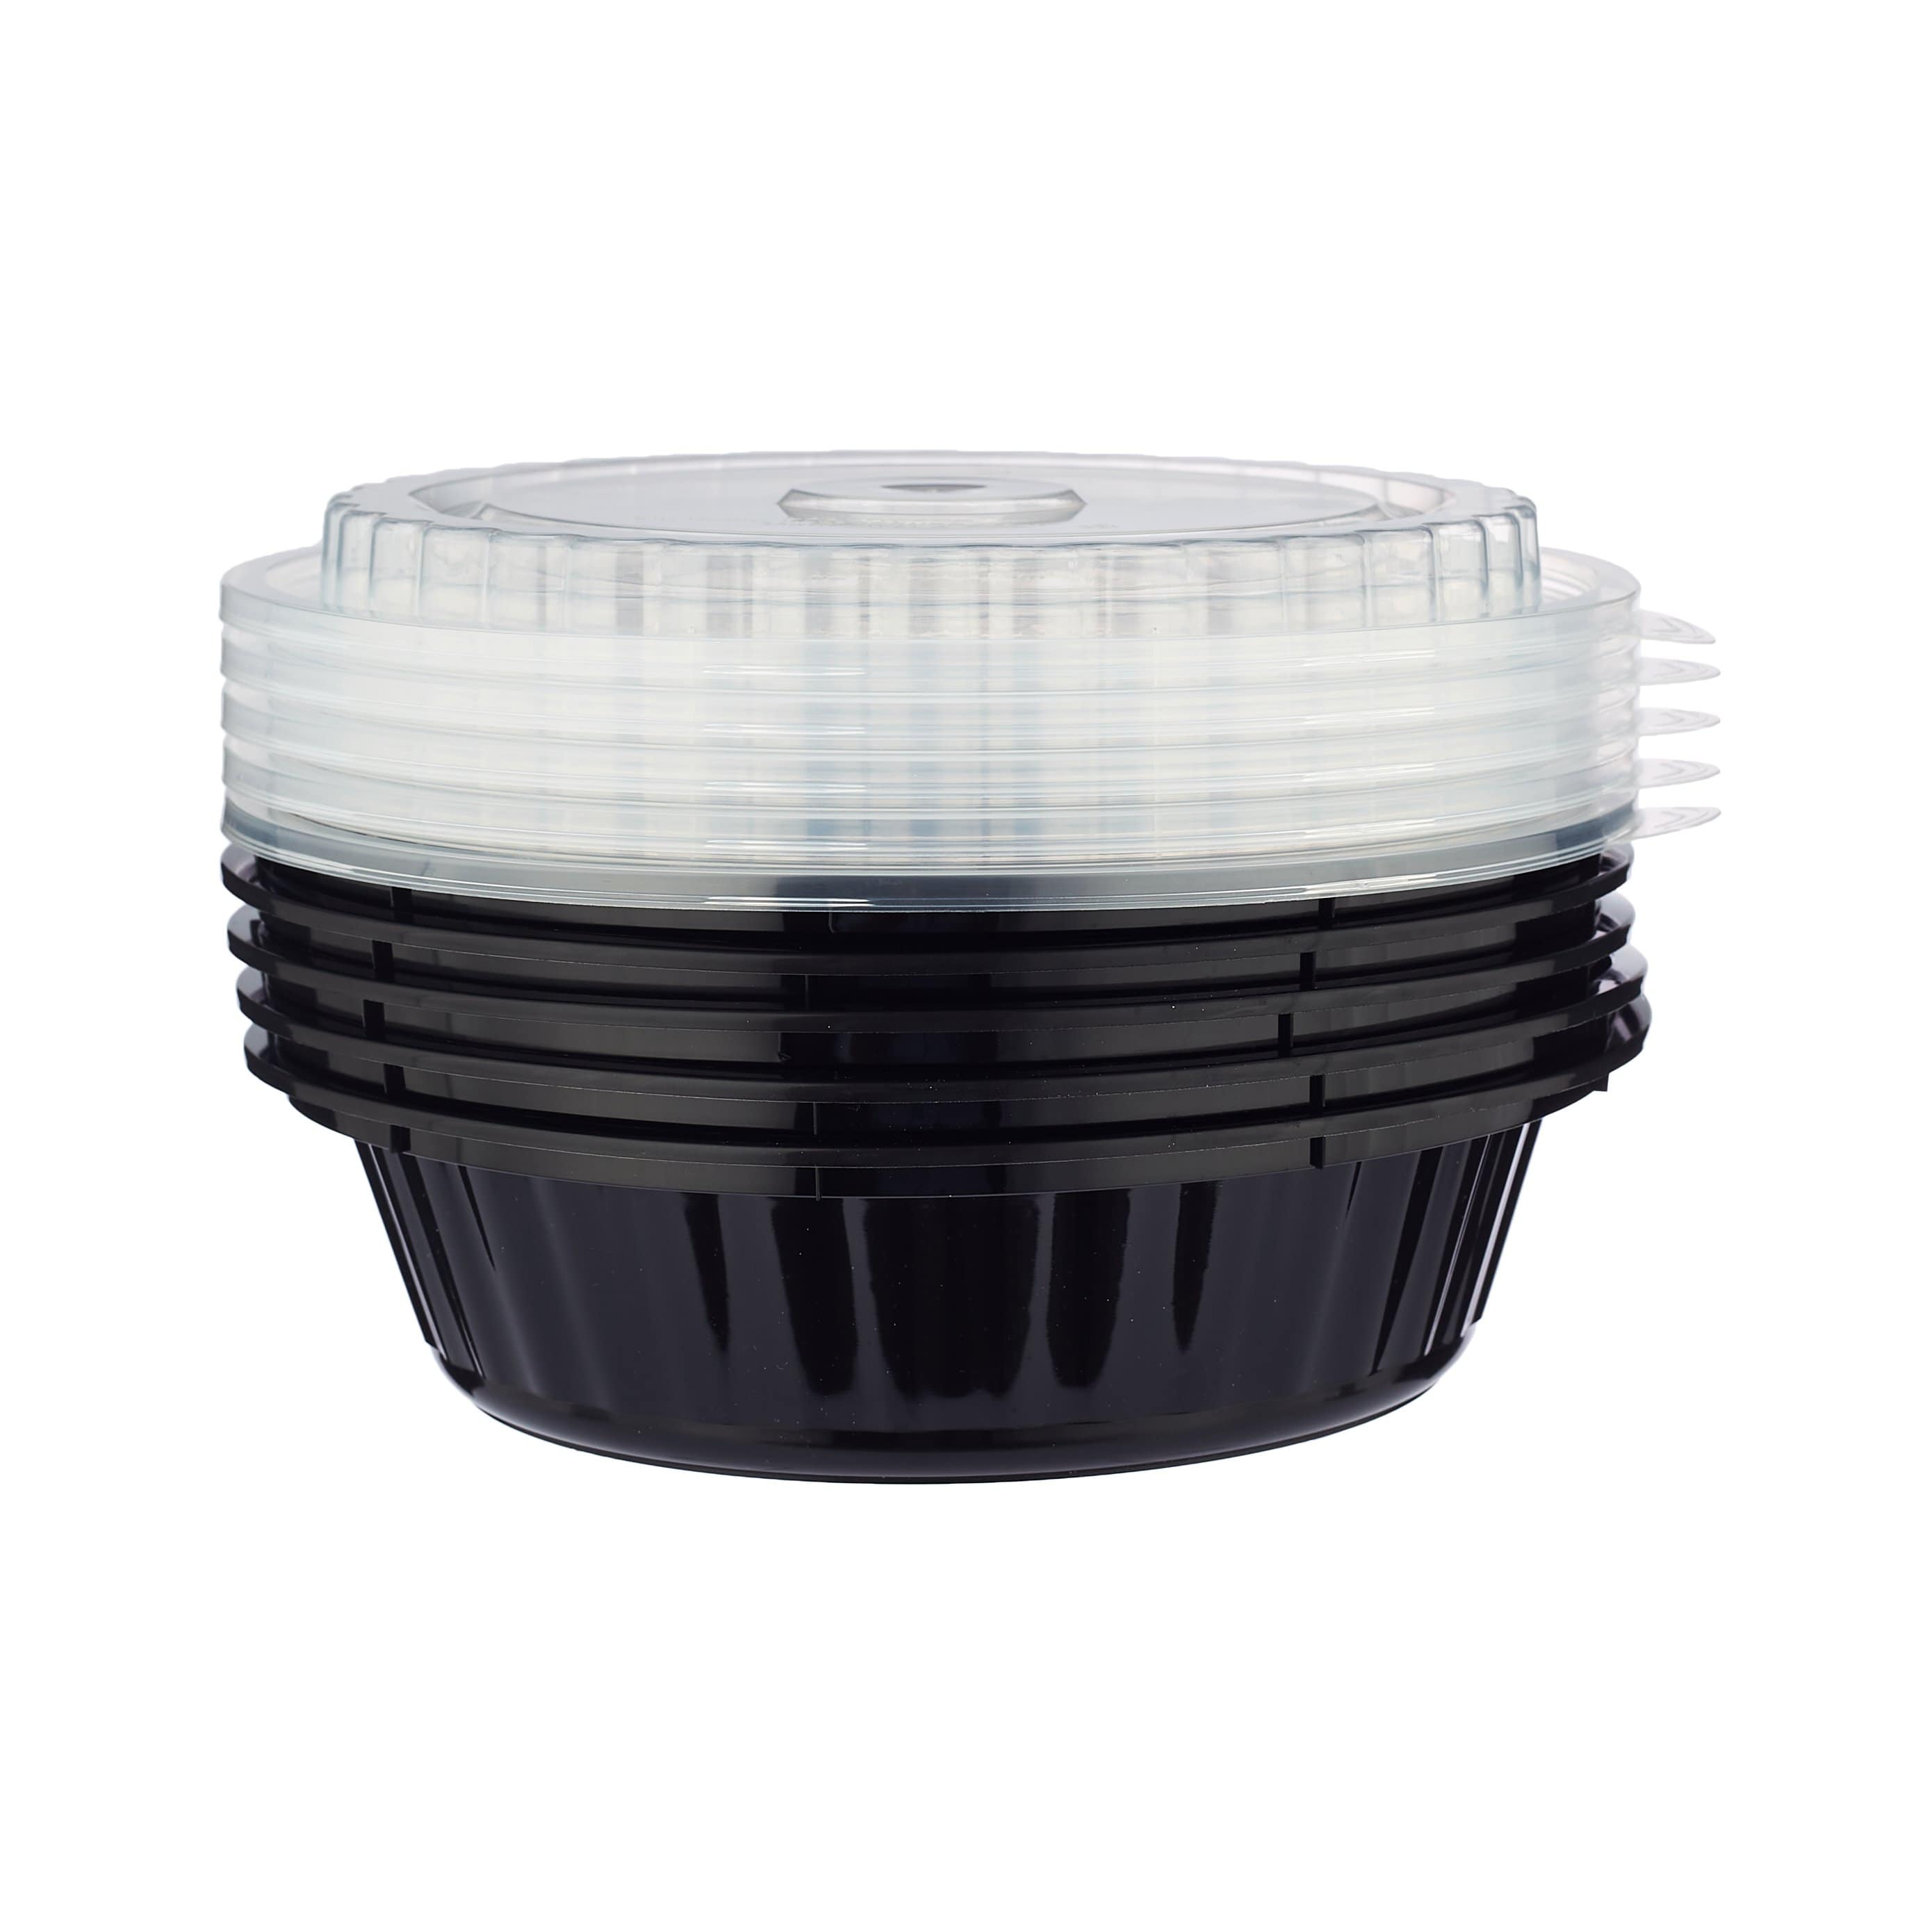 Black Base Round Container 24 oz with Lids 150 Pieces - Hotpack Global